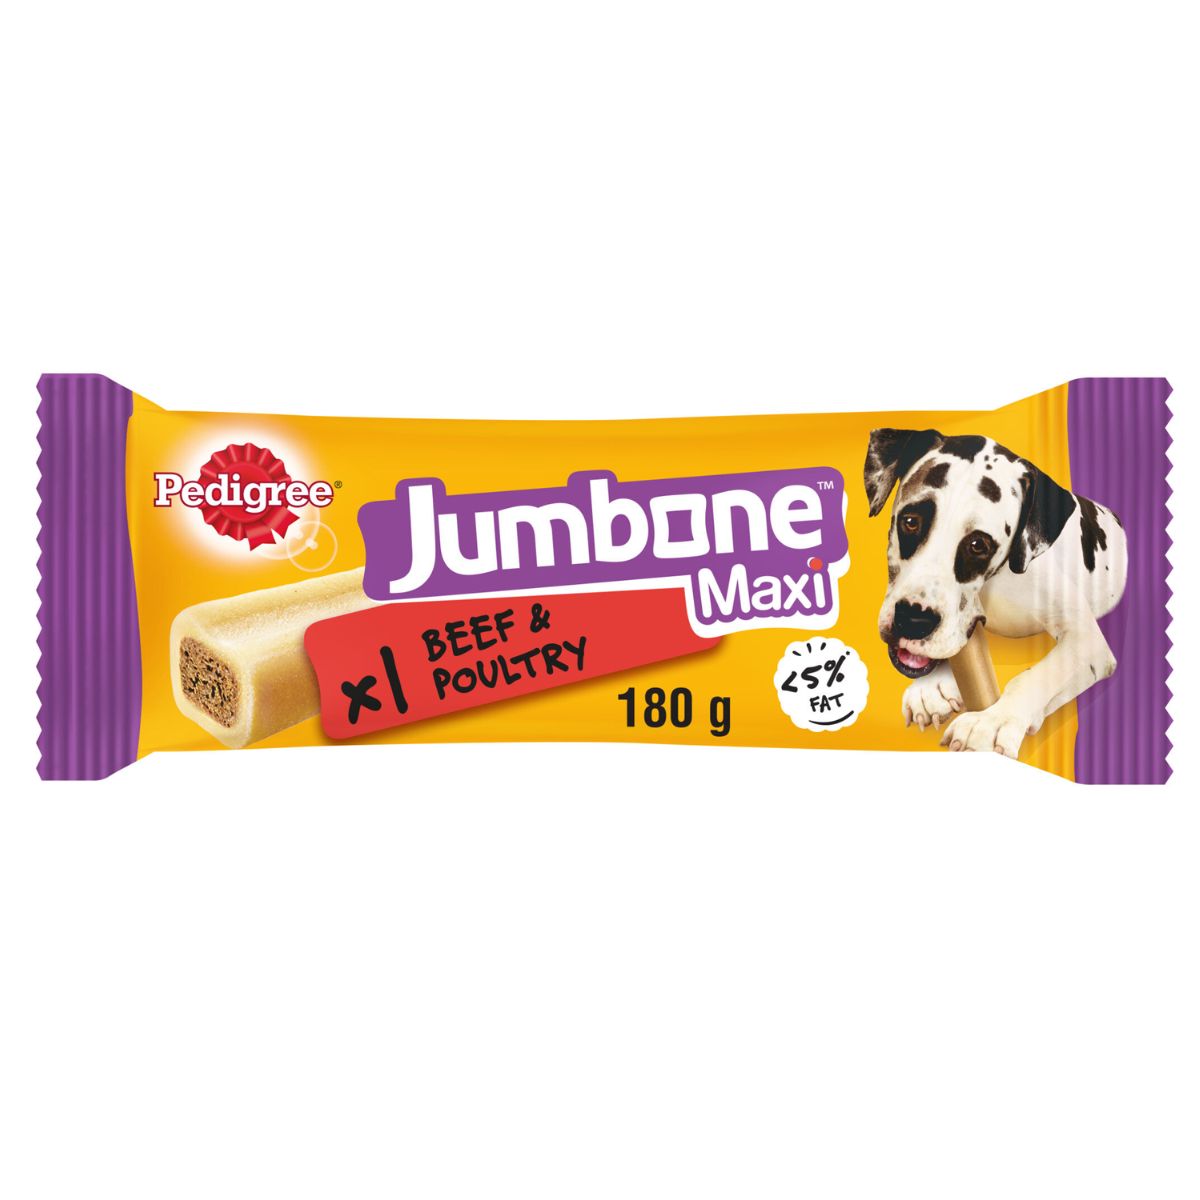 Pedigree - Jumbo Maxi Beef and Poultry - 180g dog treat.